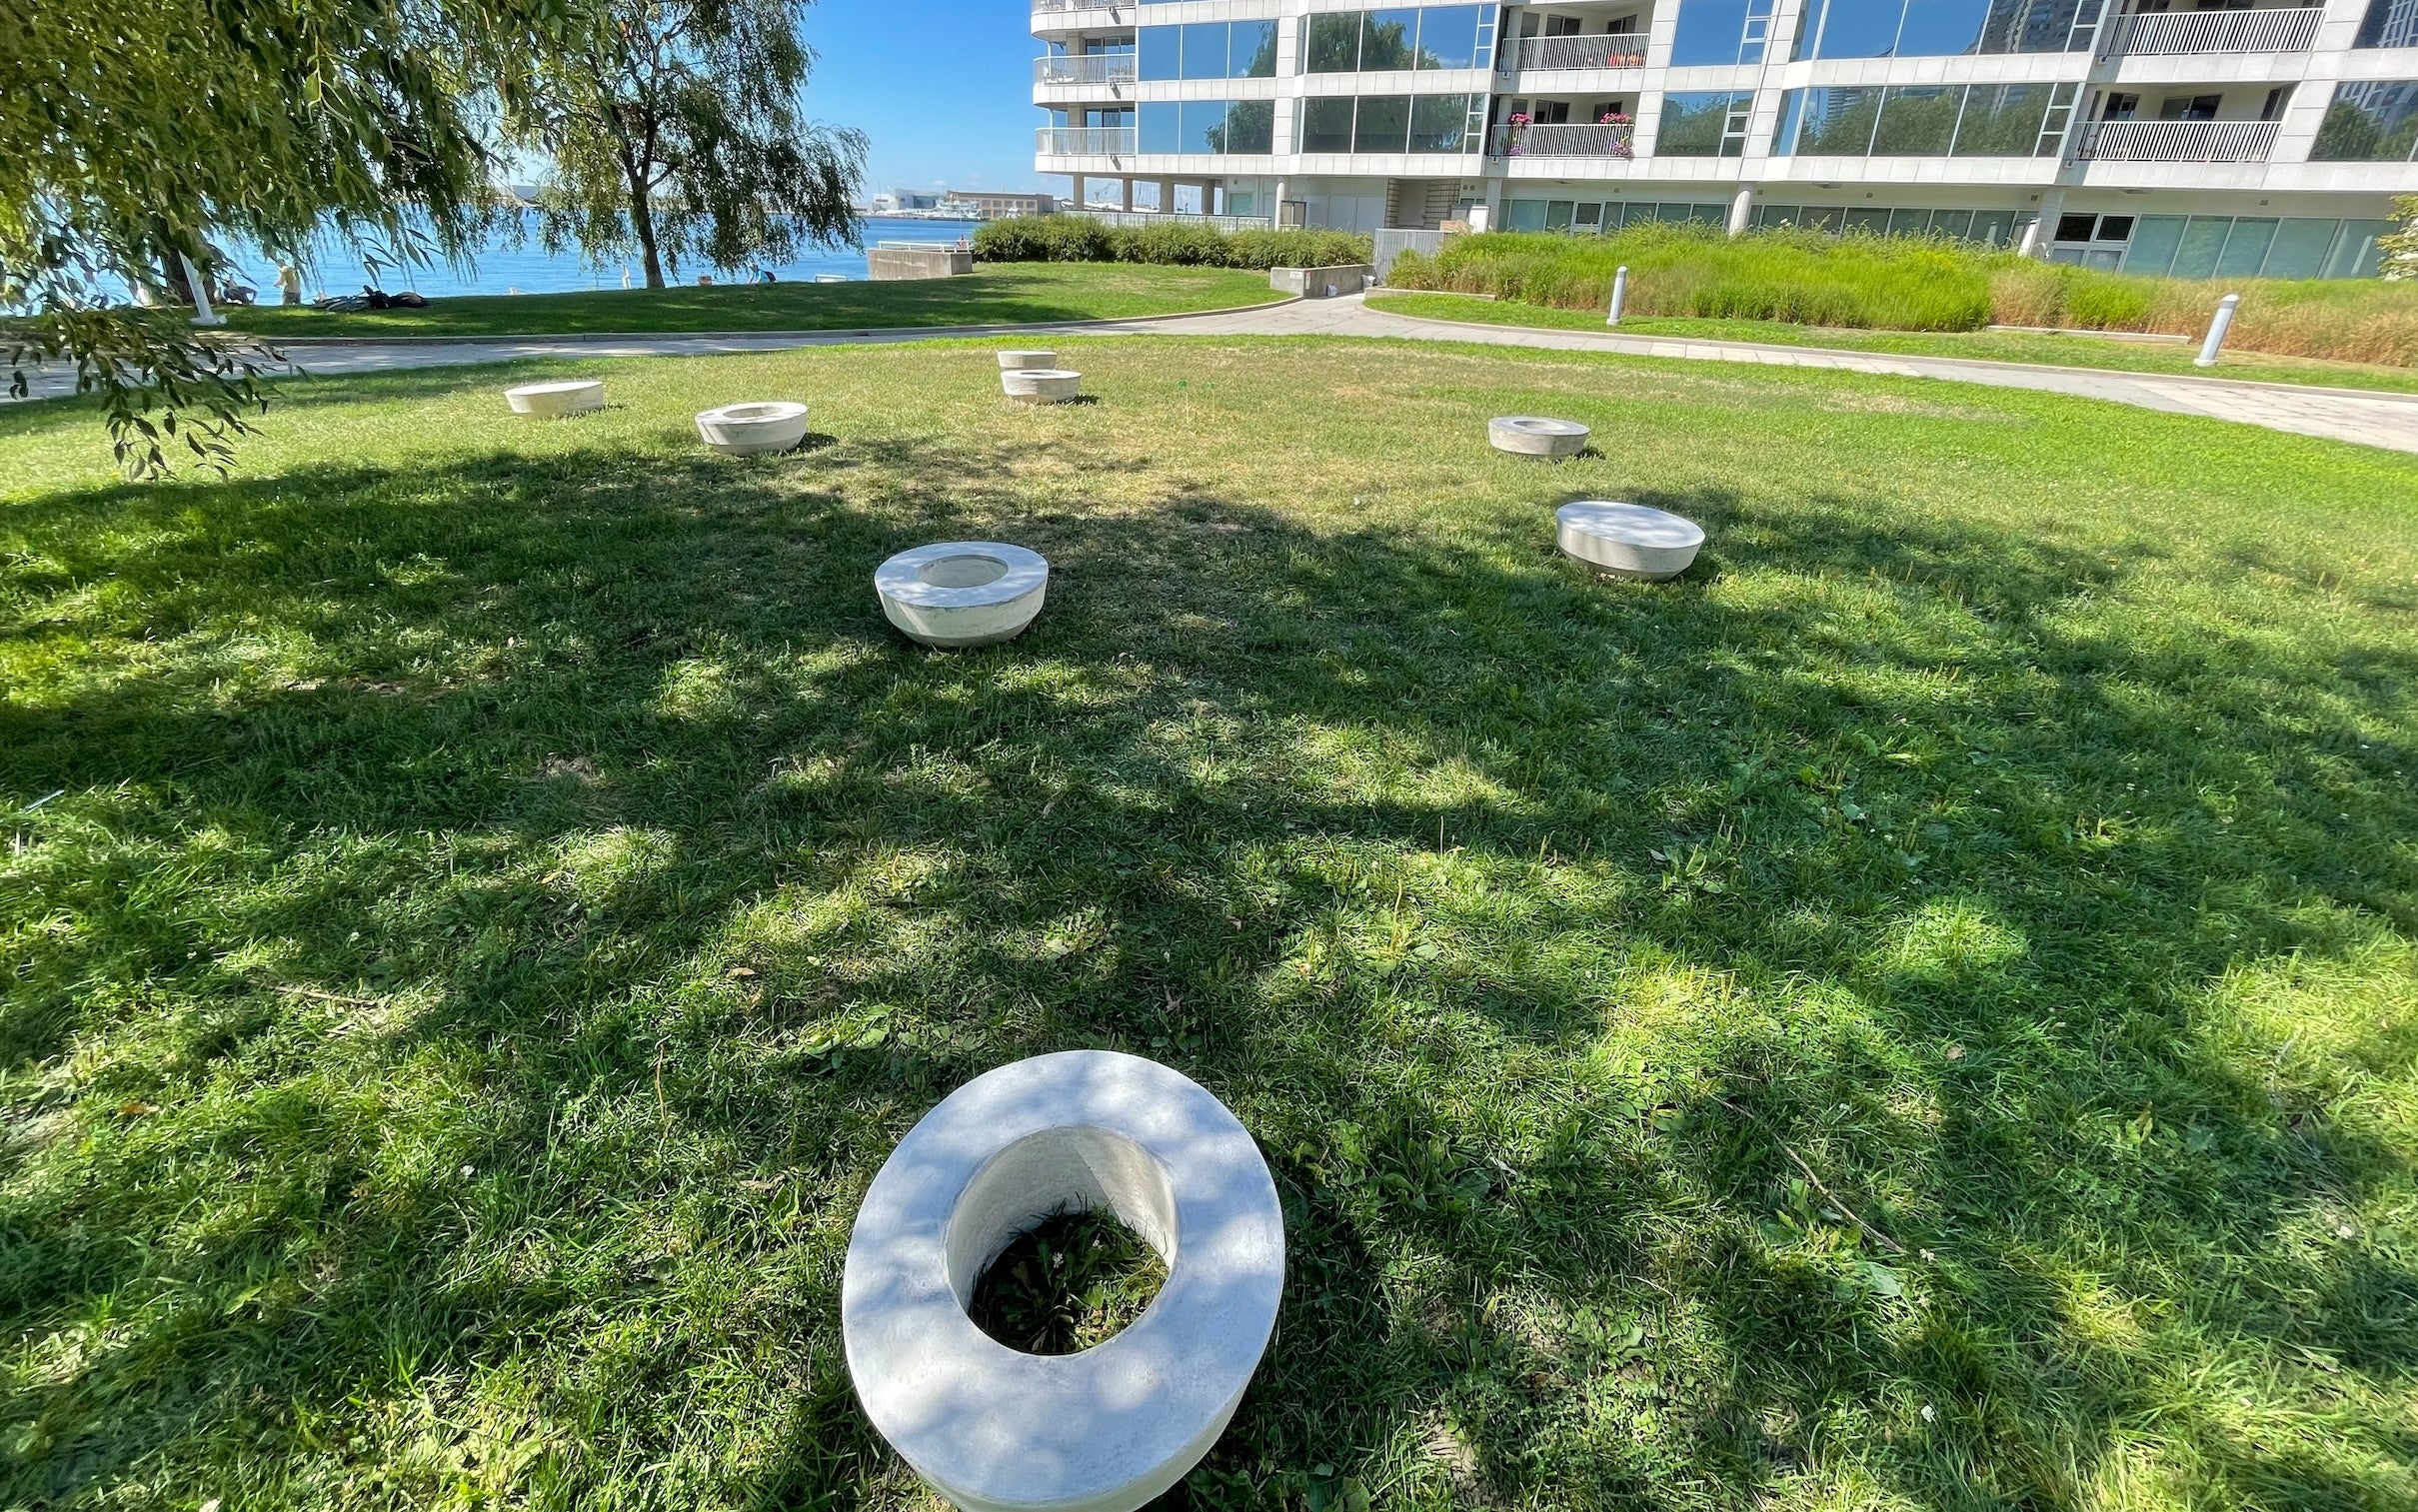 A sculpture with eight separate concrete rings on a grassy lawn. An apartment building and lake in the background.